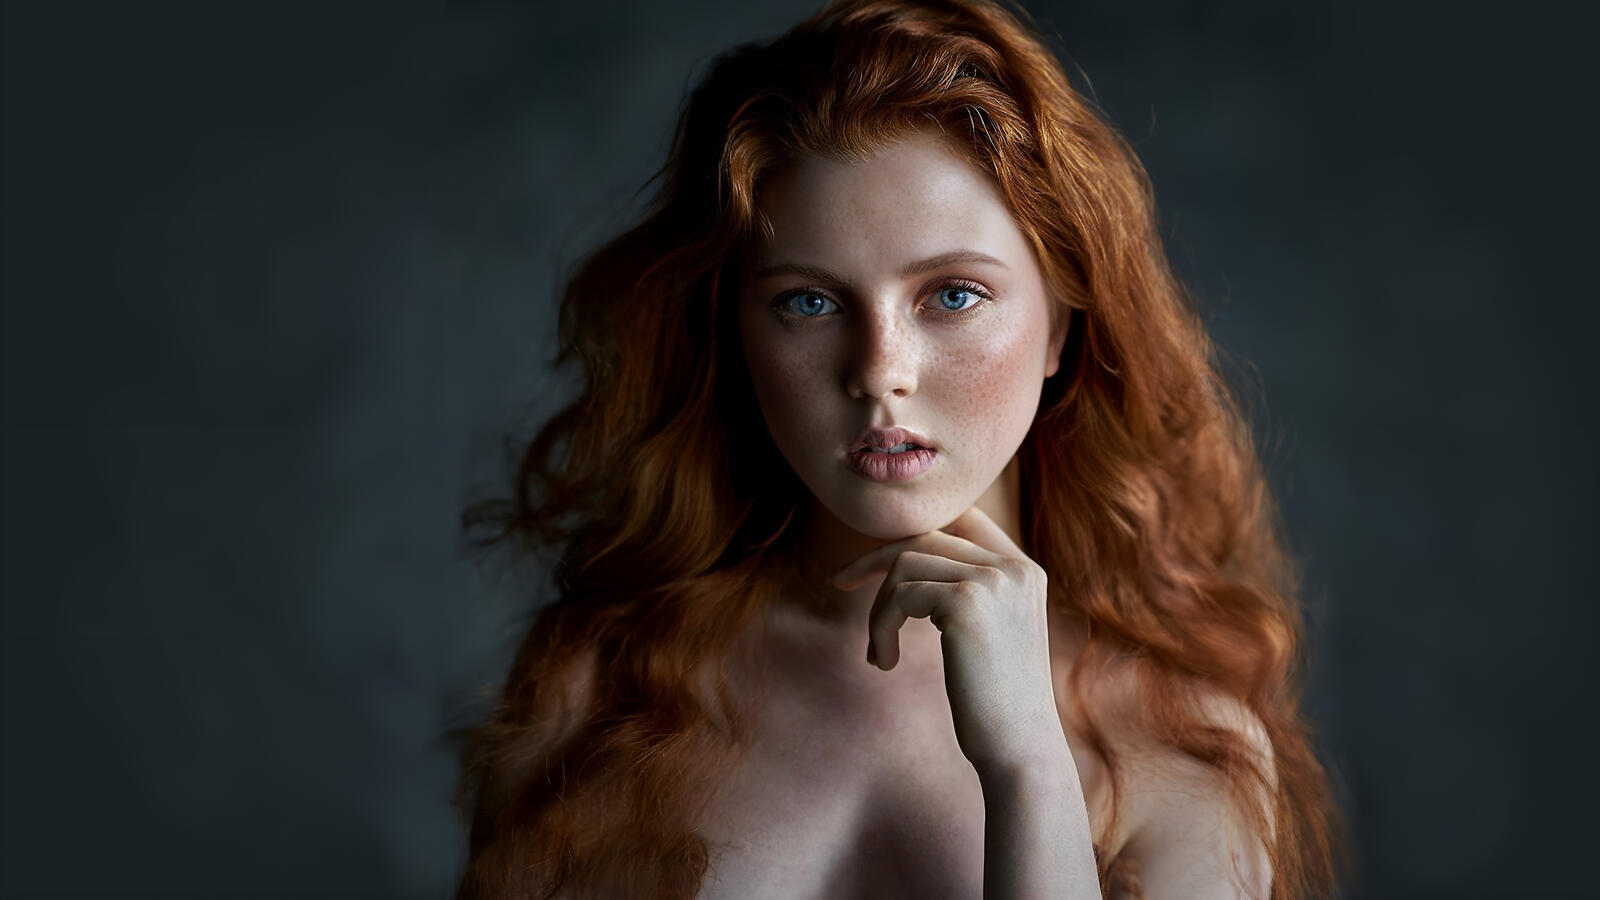 Free photo Redheaded girl with freckles on her face